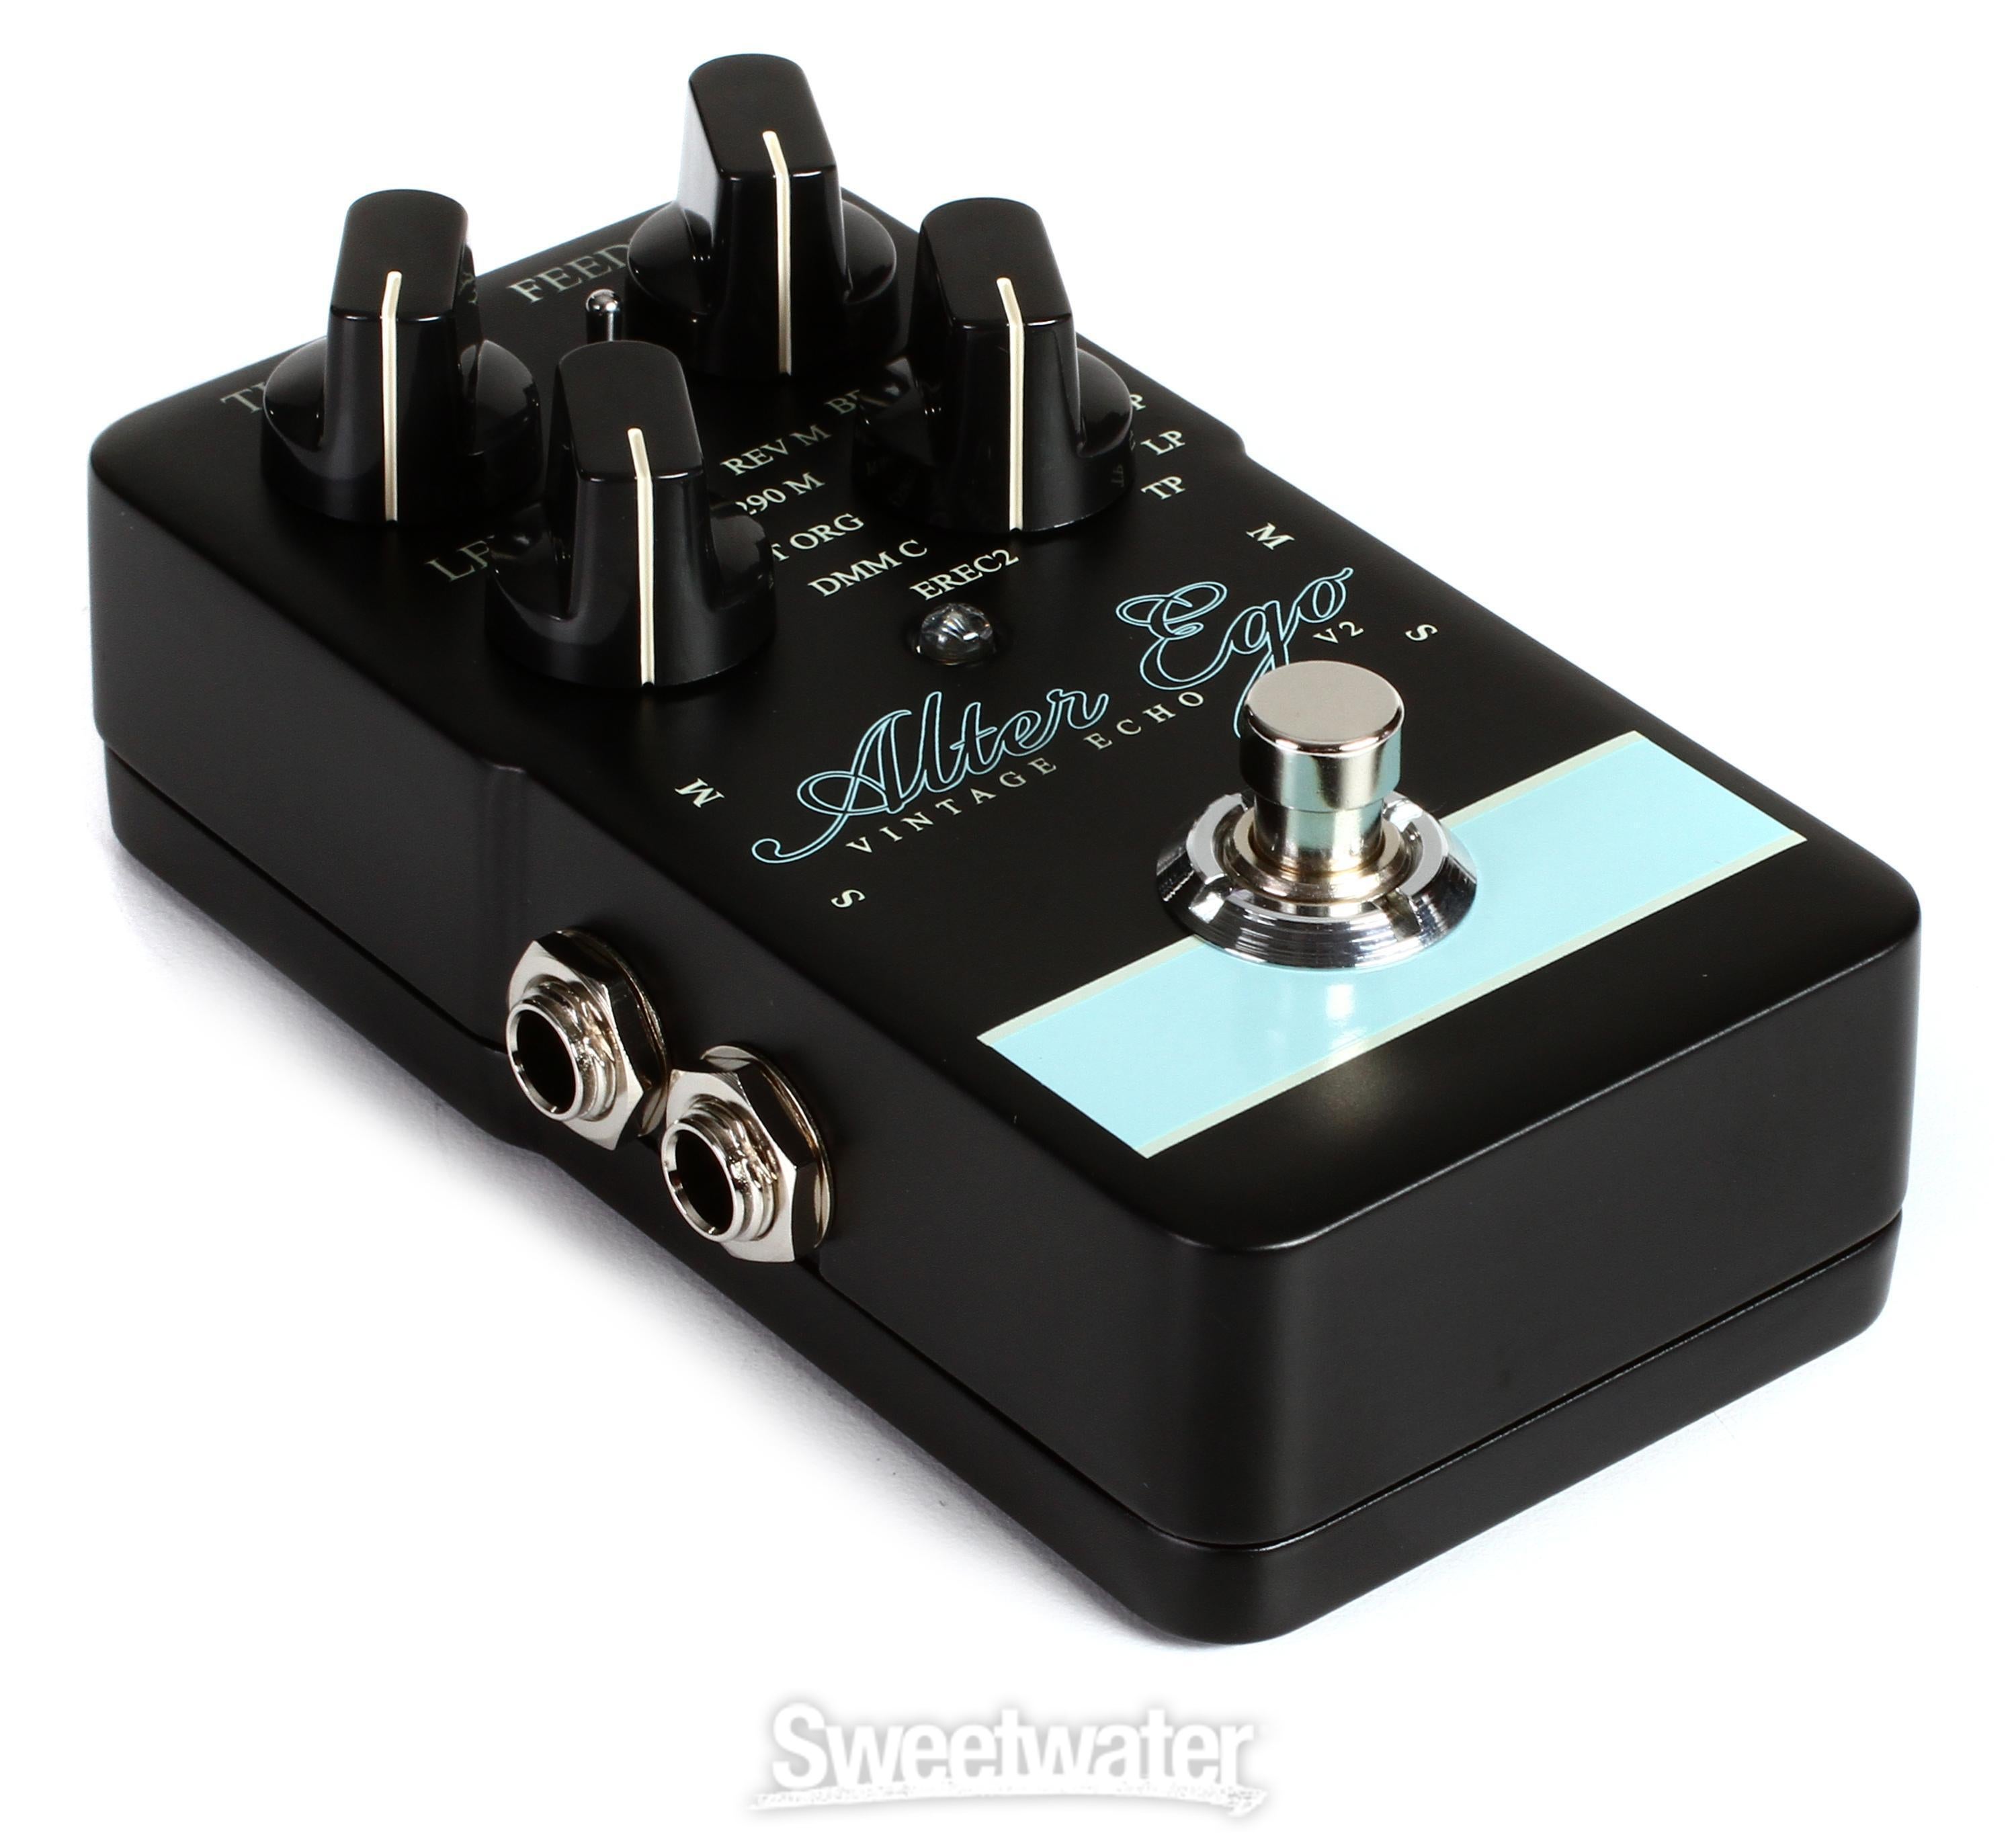 TC Electronic Alter Ego V2 Vintage Delay and Looper Pedal | Sweetwater